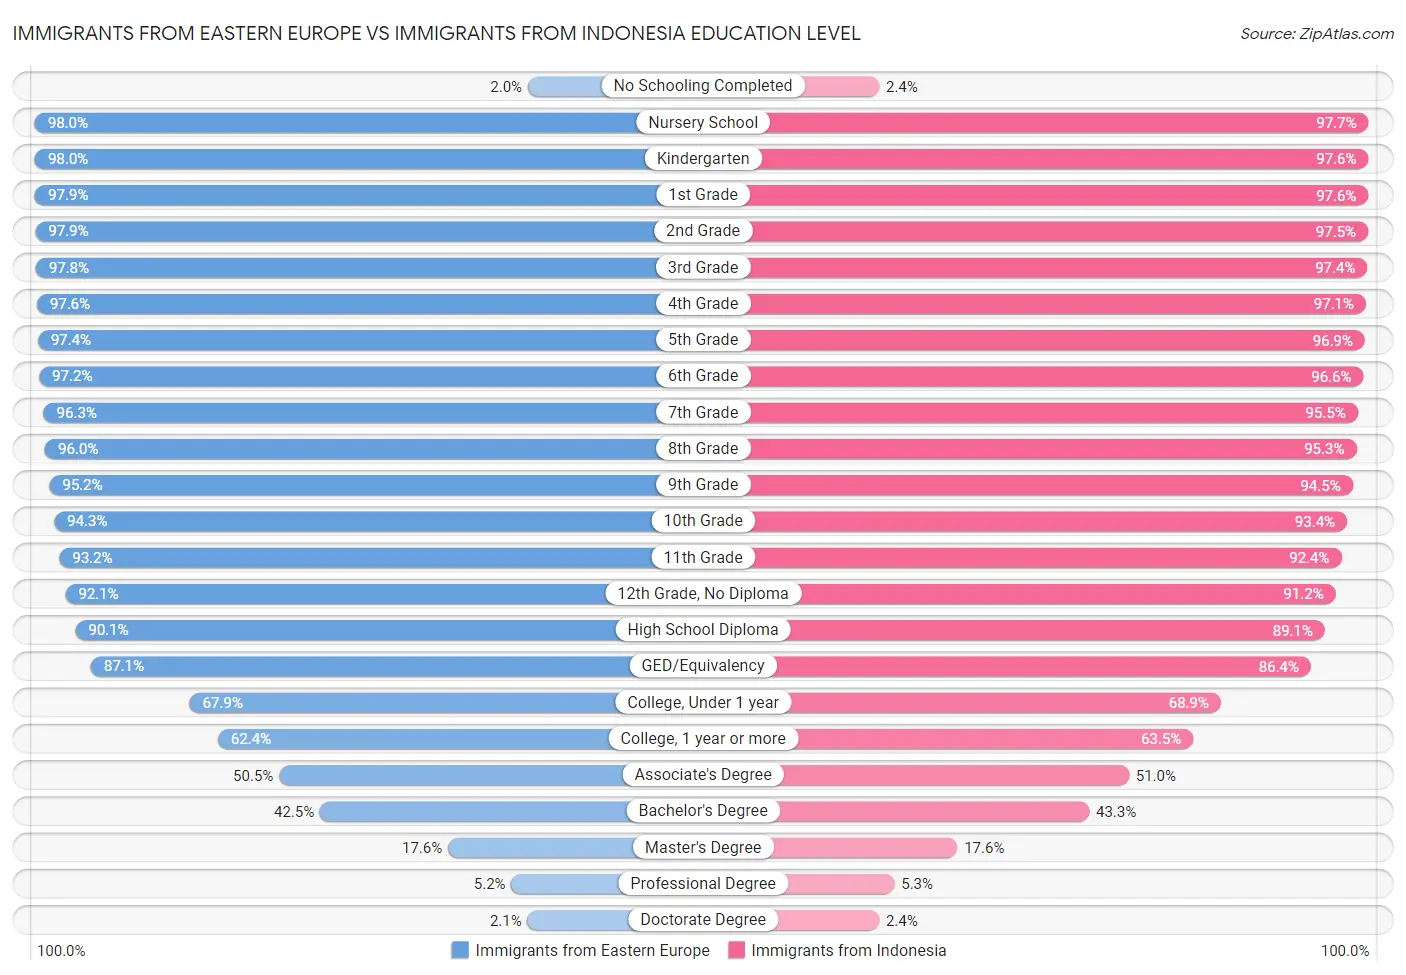 Immigrants from Eastern Europe vs Immigrants from Indonesia Education Level